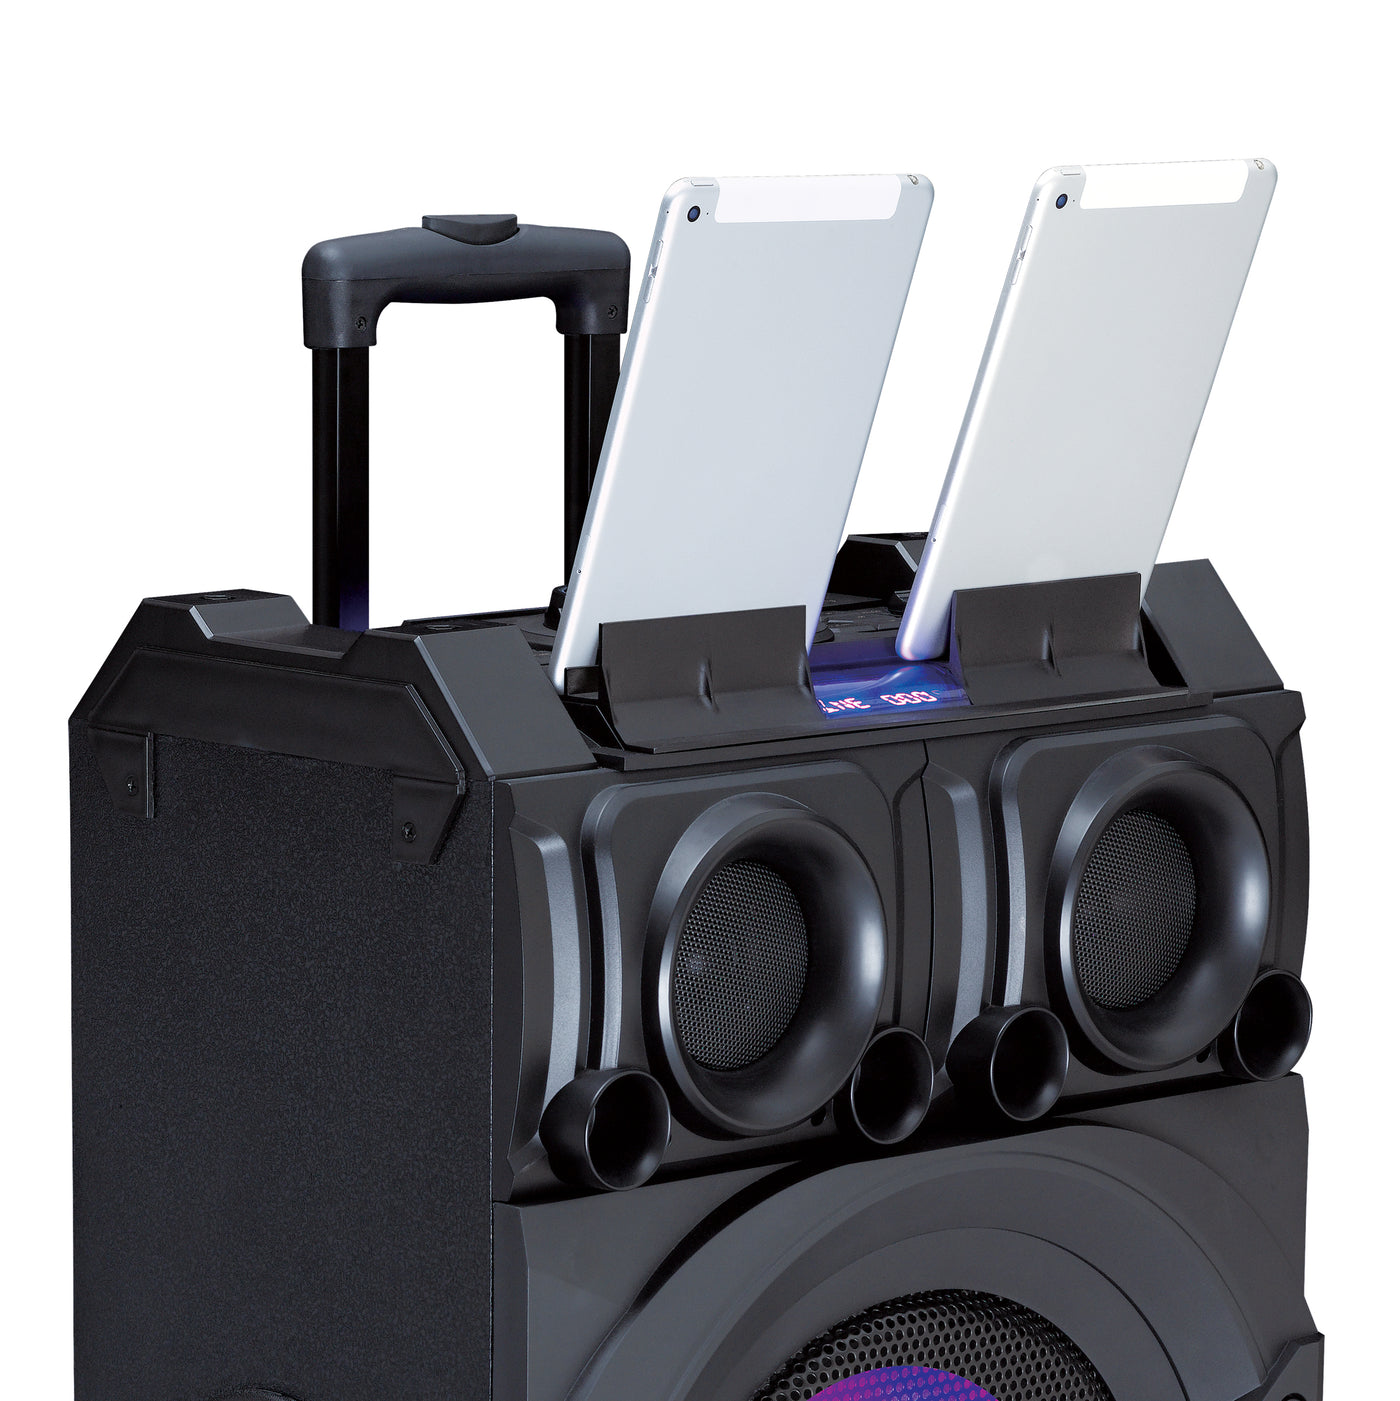 LENCO PMX-350 - High power PA/DJ mixer system with Bluetooth®, USB, built-in battery, wireless microphone and party lights